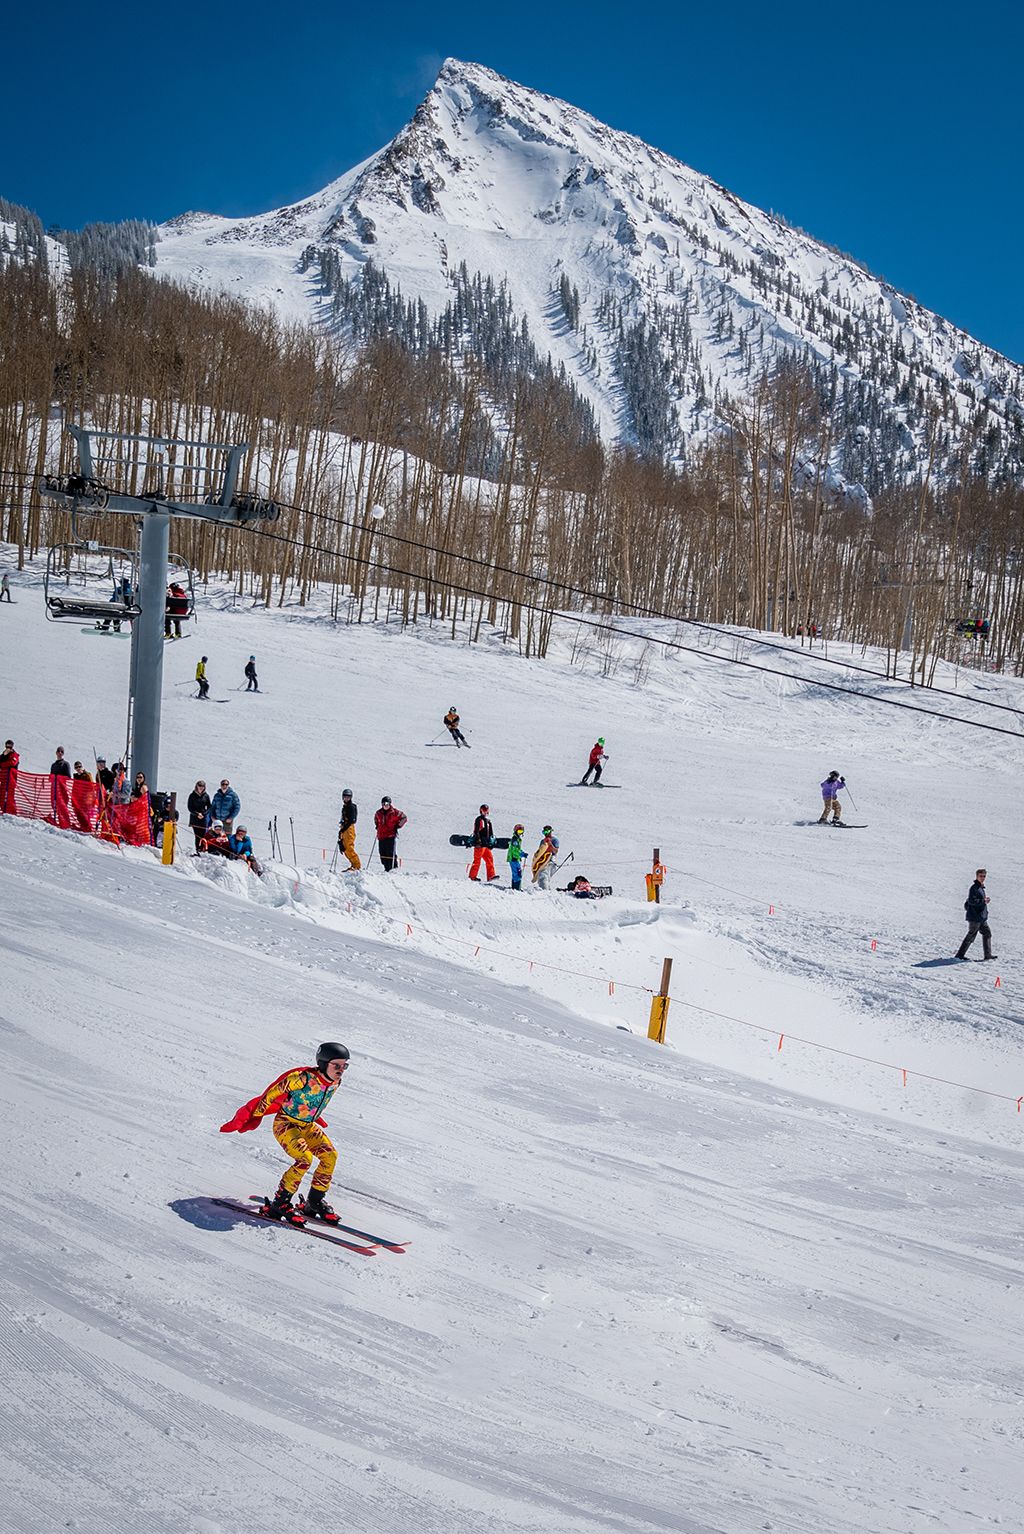 A skier in a costume skis down a groomed slope towards the pond skim at CBMR.